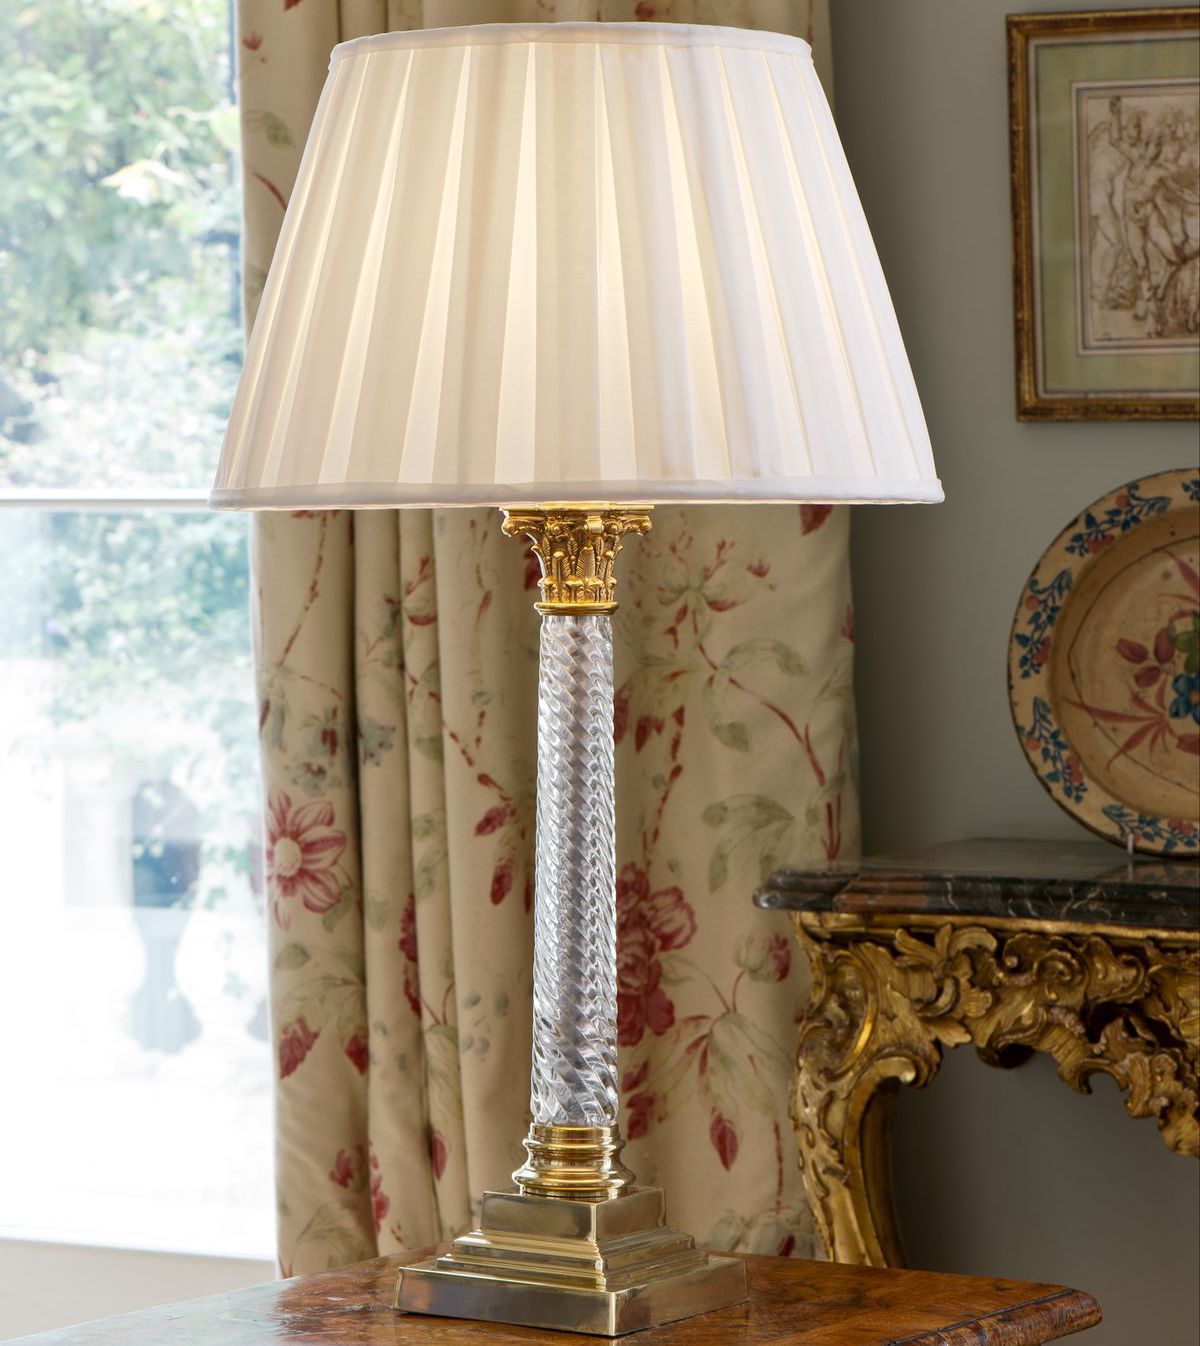 Glass and brass column light with pleated silk cream  lampshade in front of floral curtain